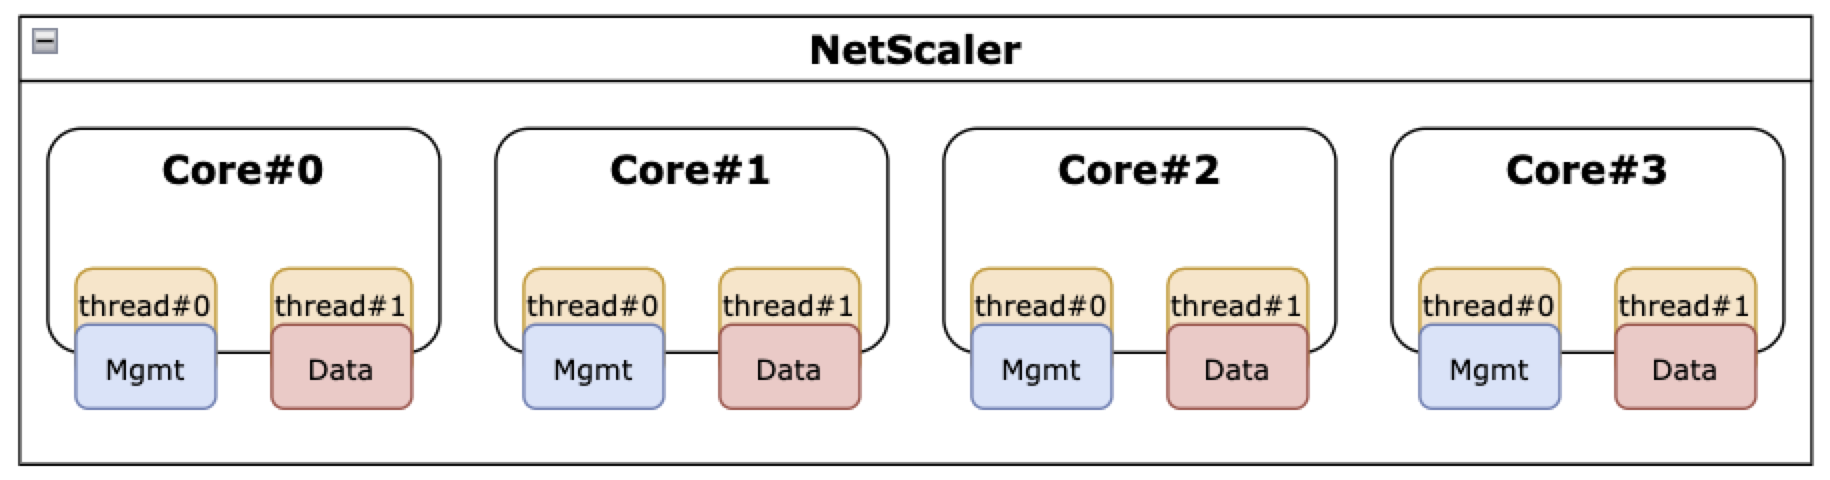 NetScaler with SMT feature enabled